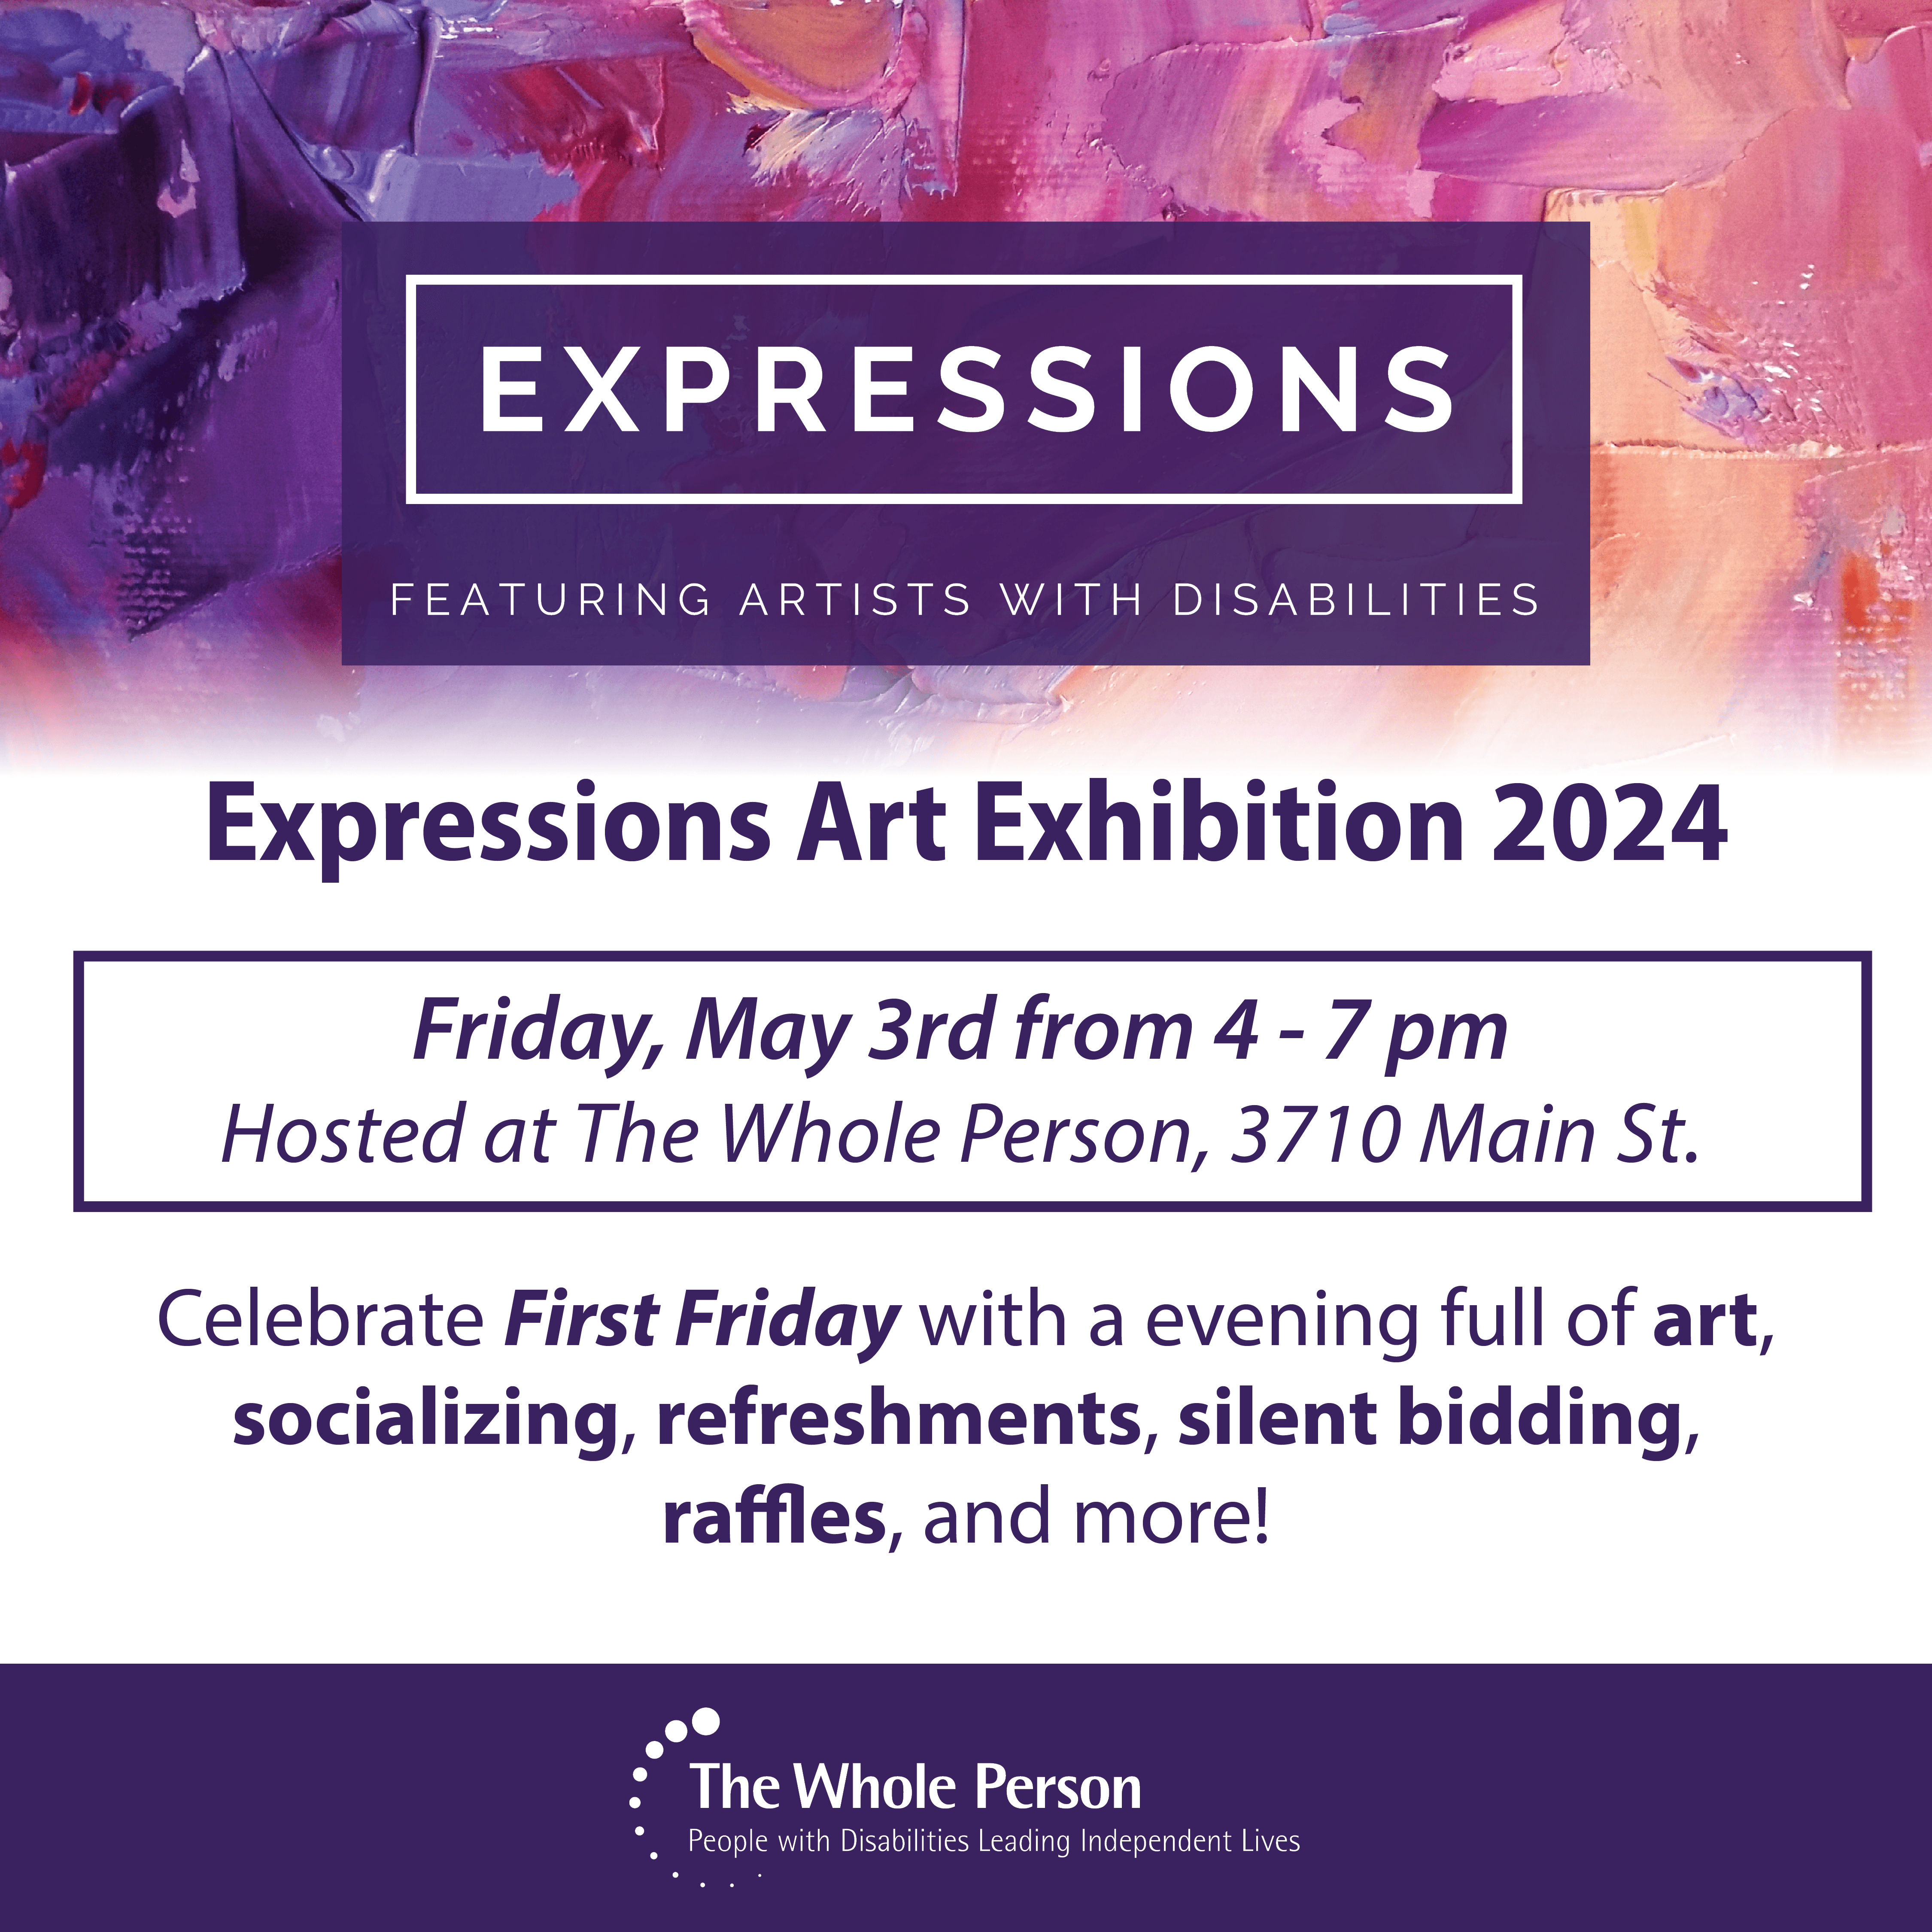 Graphic with a colorful paint background in purple pink yellow and black. Expressions logo in white with the text featuring artists with disabilities. Expressions art exhibition 2024. Friday may 3rd, from 4-7pm. Hosted at the whole person. 3710 main st. c